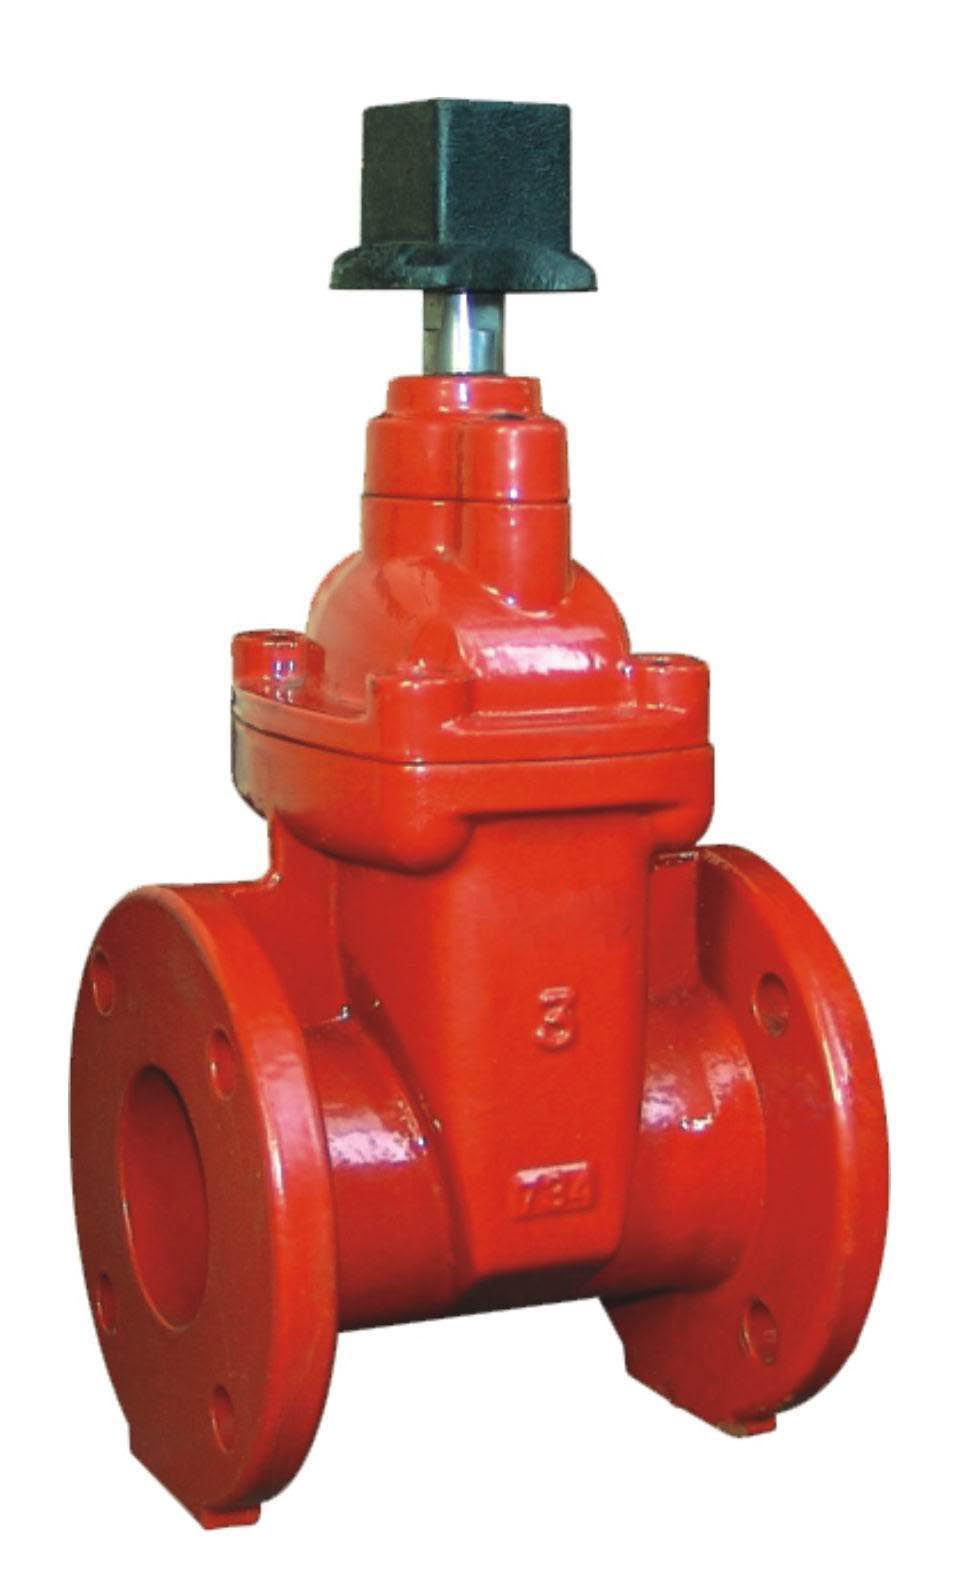 Flanged Ends NRS Resilient Seated Gate Valves-AWWA C509-UL FM Approval